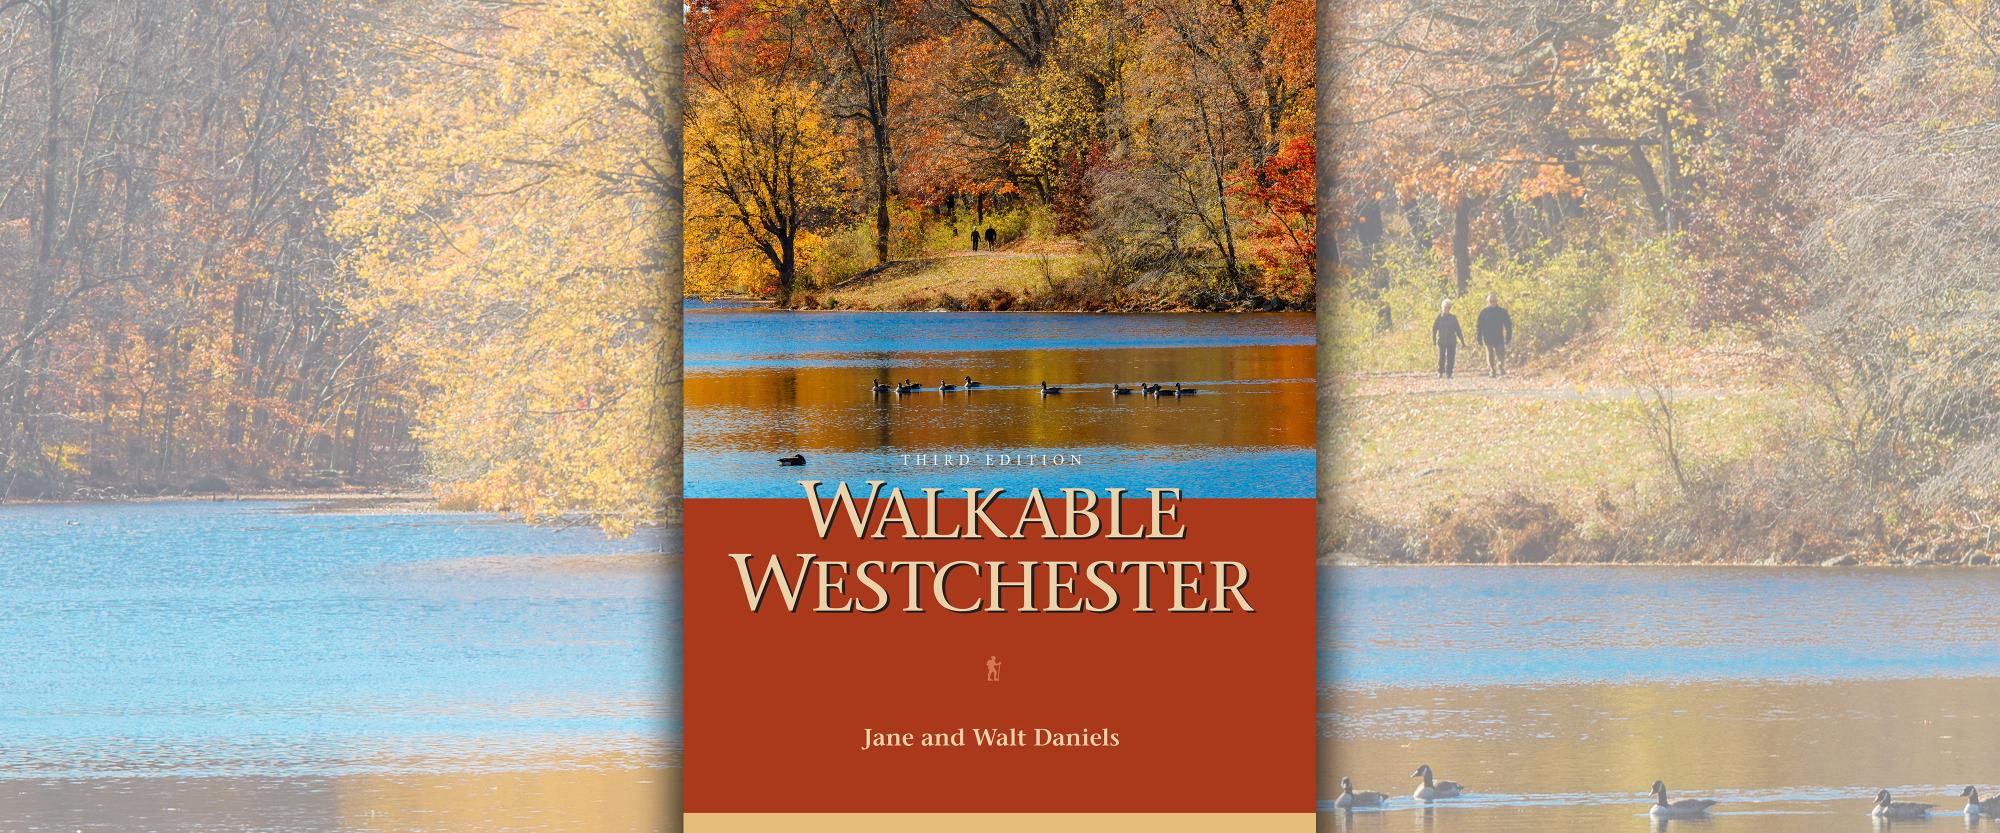 Walkable Westchester Book. Cover with Background. Photo by New York-New Jersey Trail Conference.